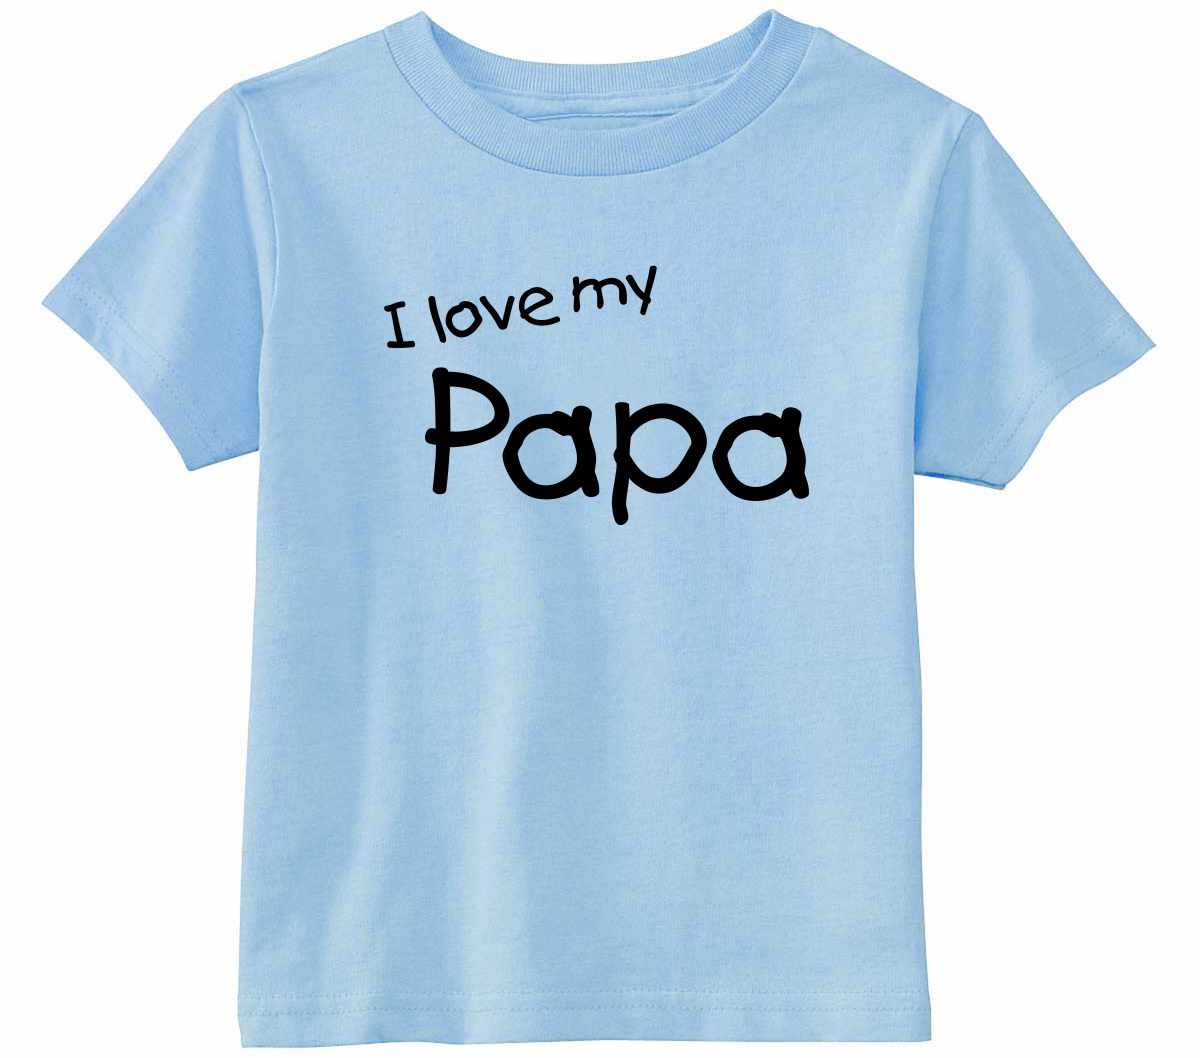 I Love My Papa on Infant-Toddler T-Shirt (#1315-7)